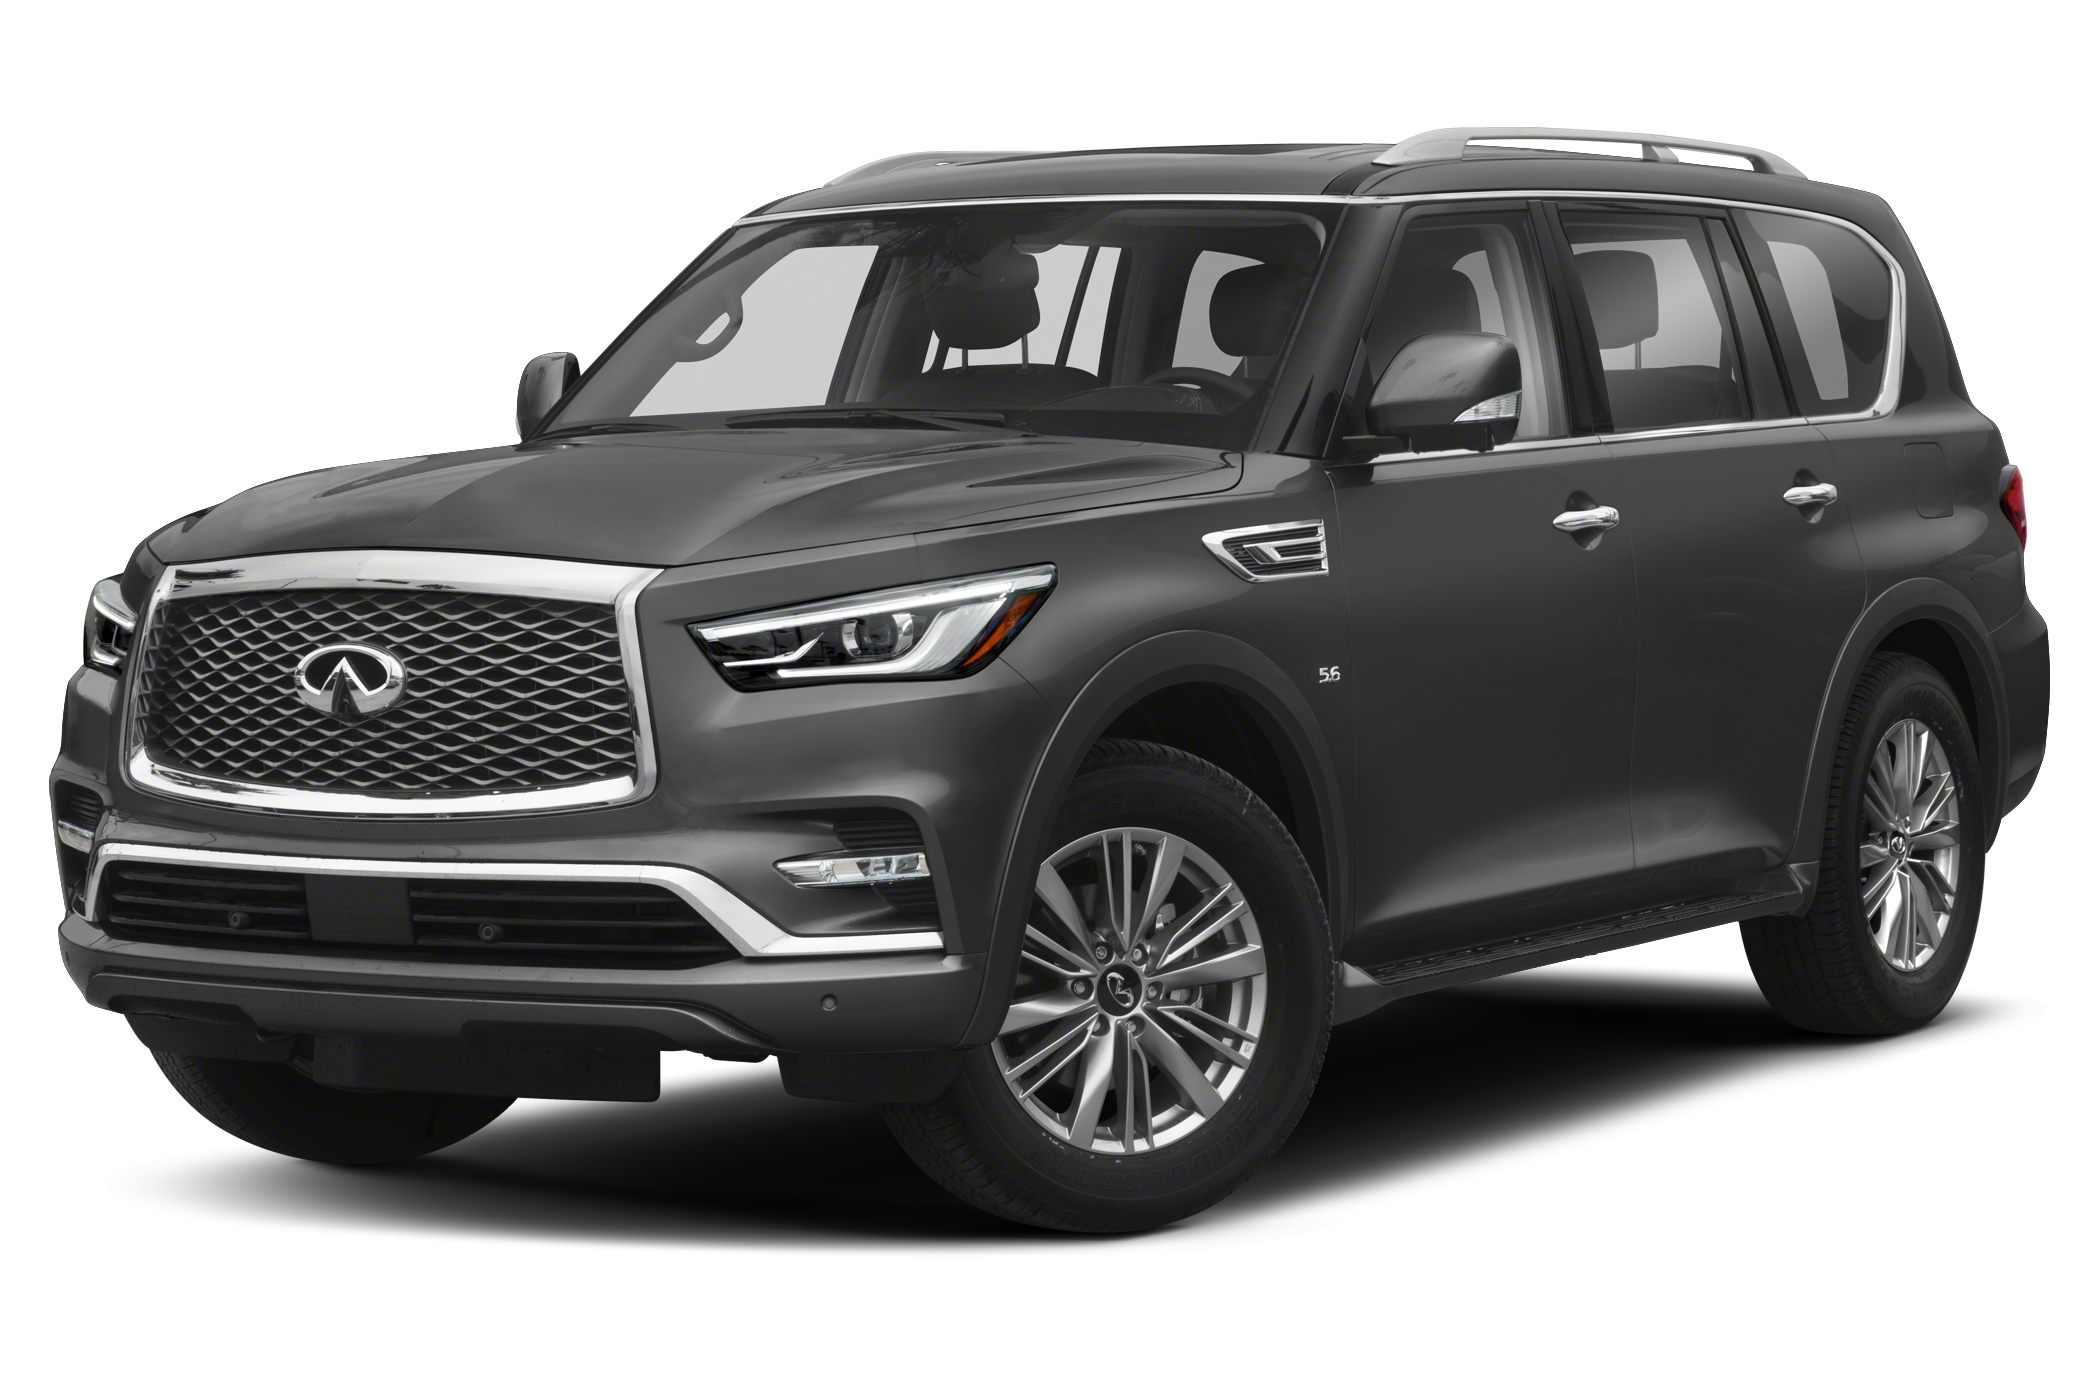 2020 Infiniti Qx80 Luxe 4dr 4x2 Pictures